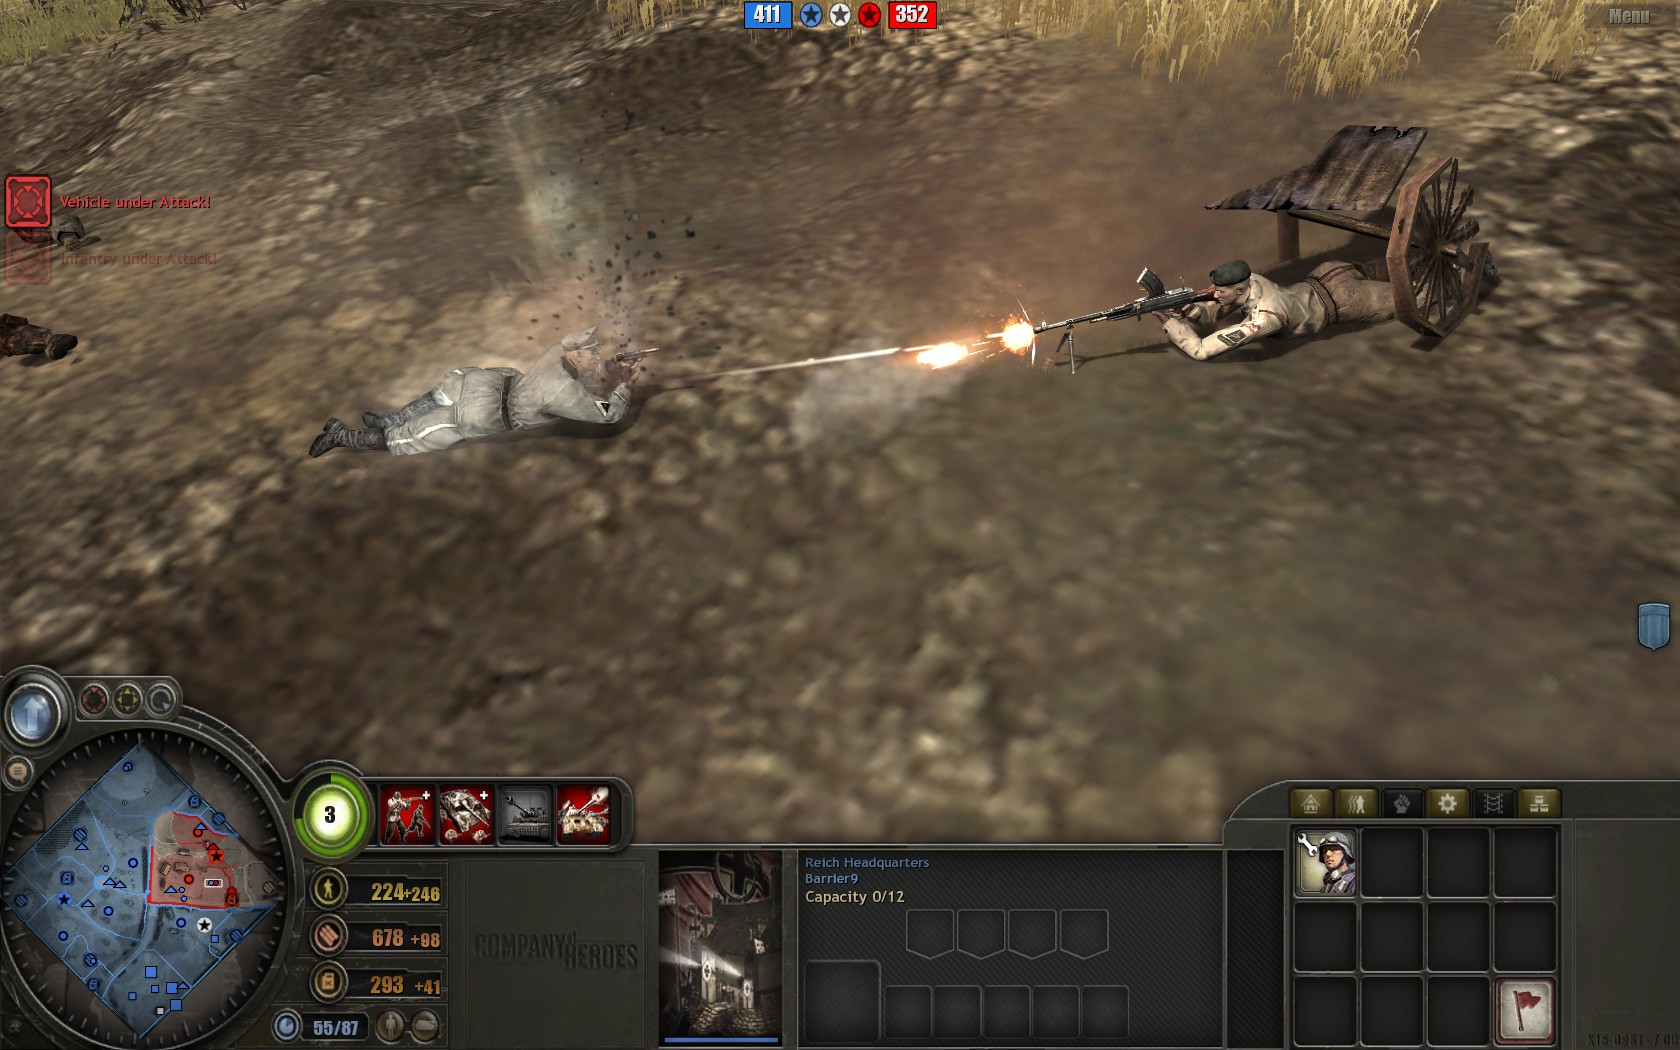 company of heroes legacy edition gameplay